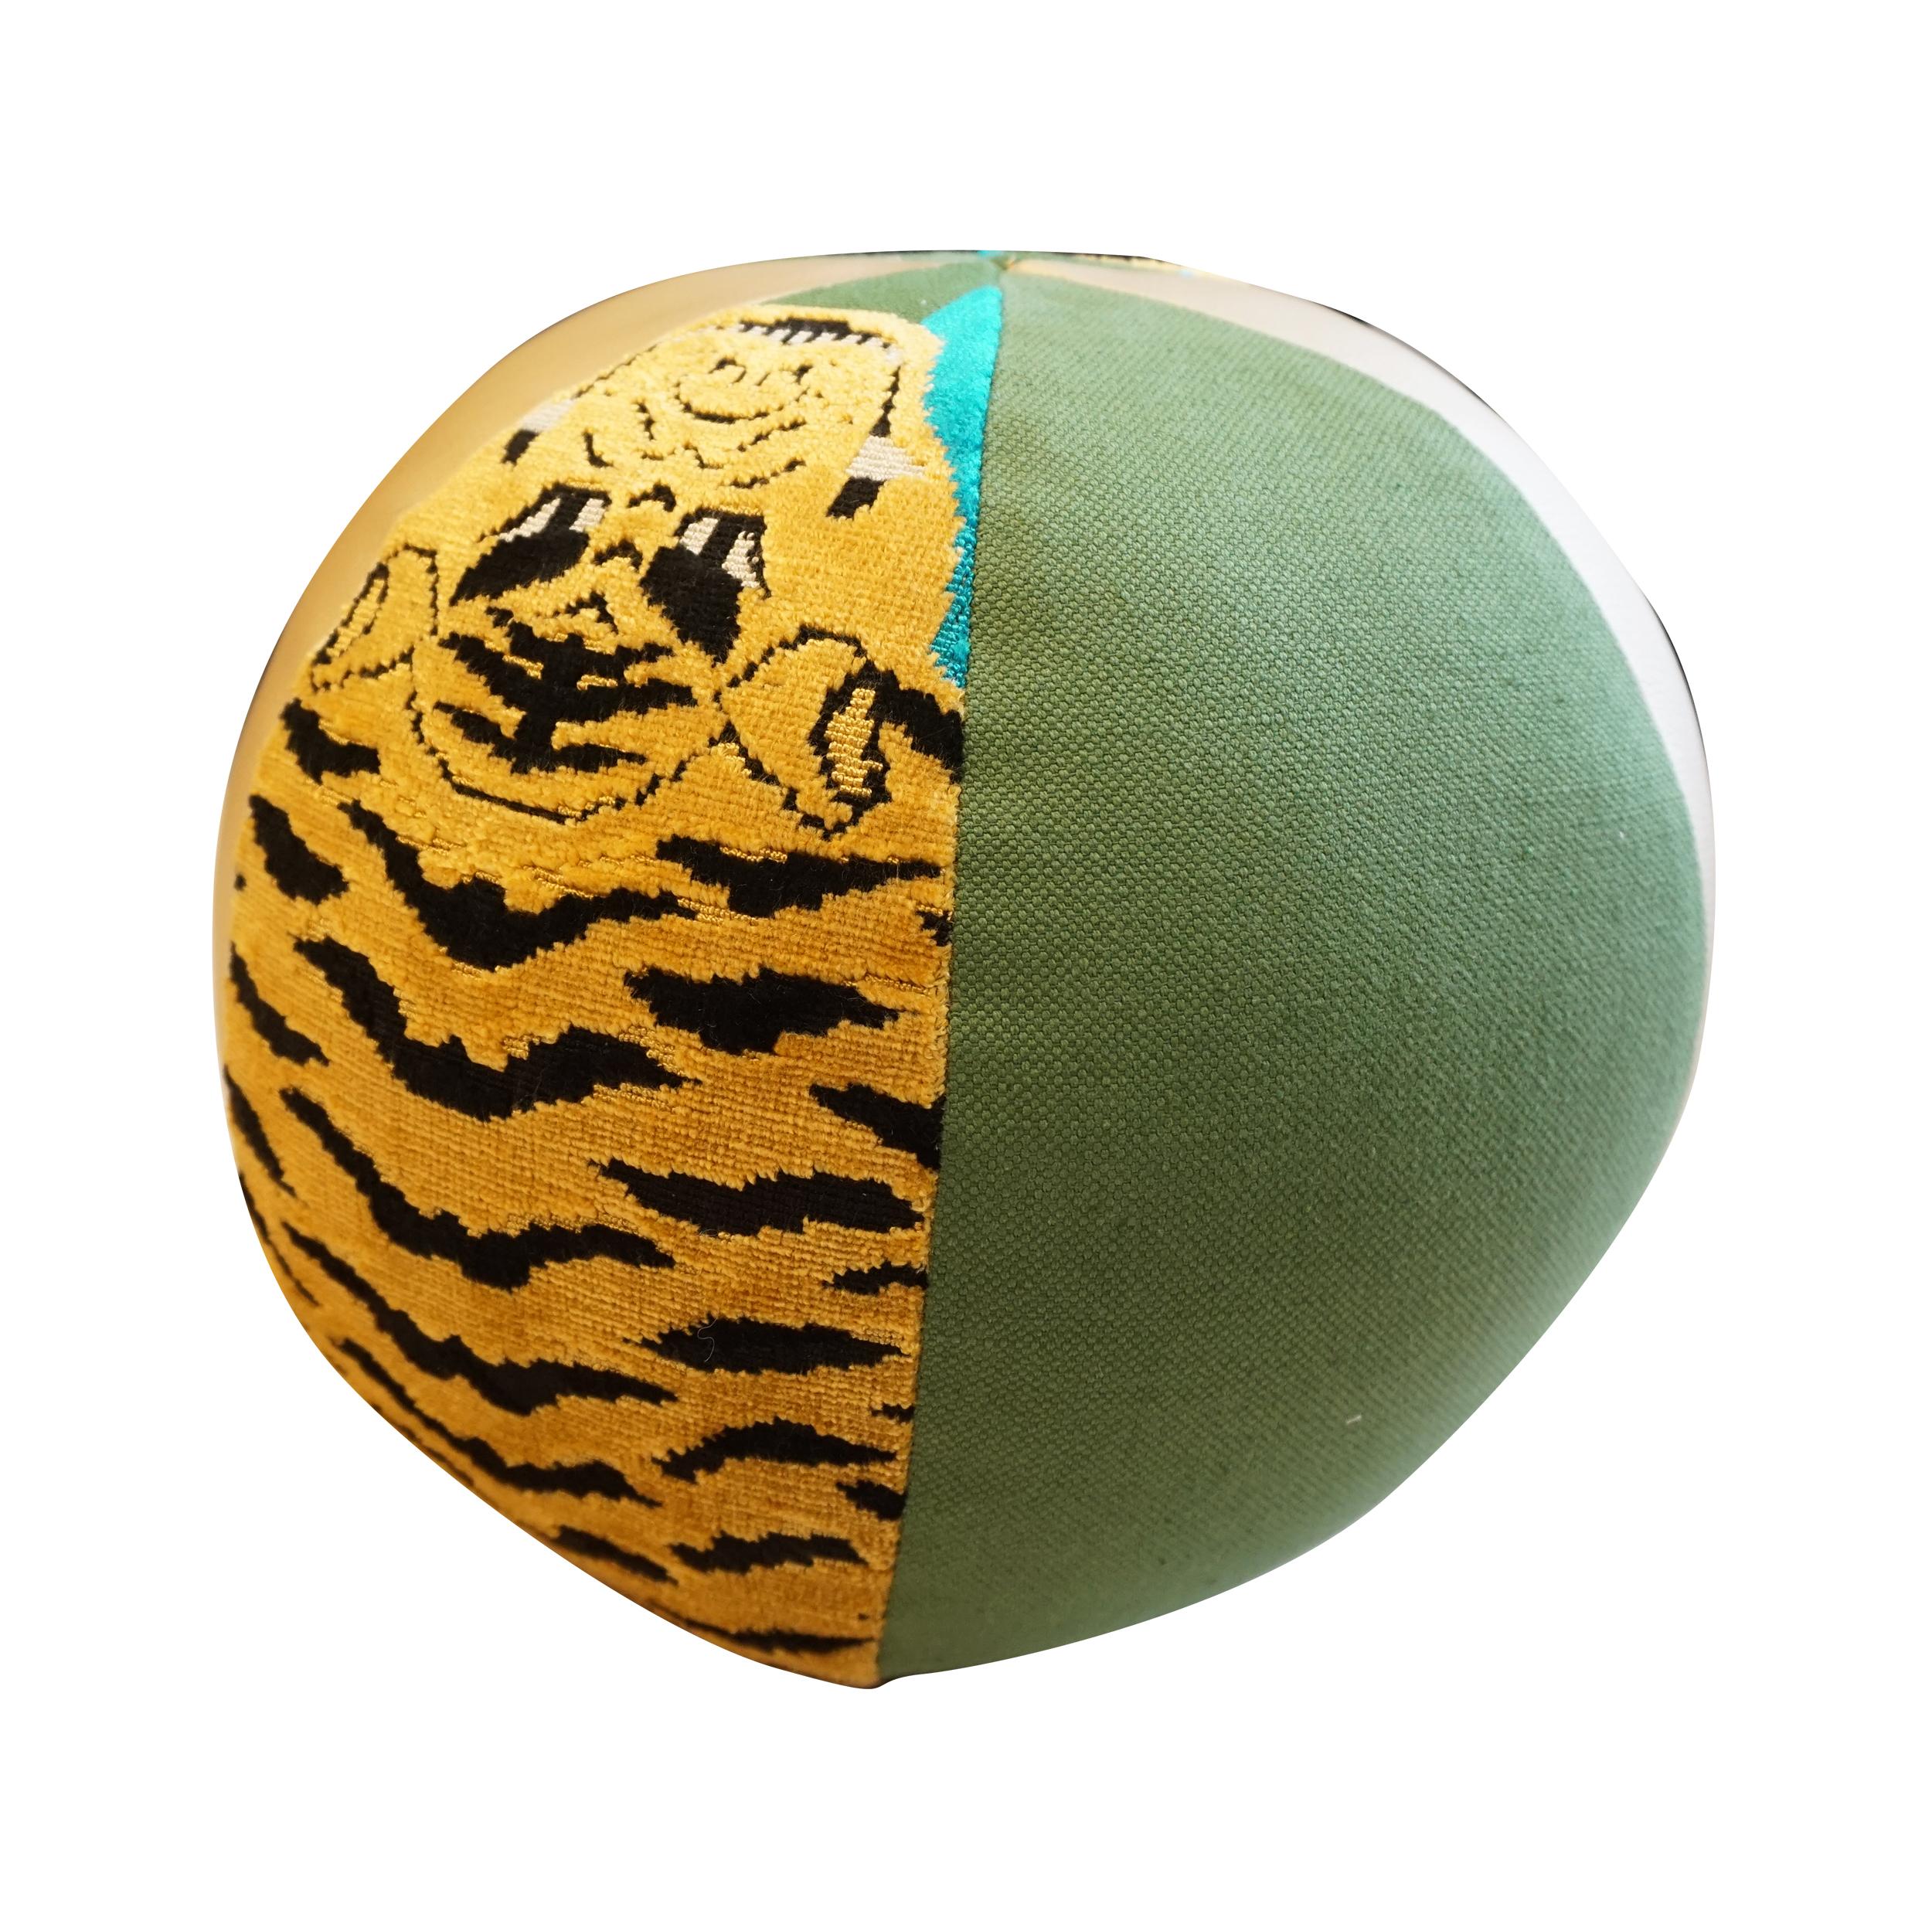 This round ball pillow has an alternating fabric pattern like a beach ball. The stunning designer fabric on this pillow is Schumacher’s Jokhang Tiger velvet, and it's paired with golden vinyl and green cotton blend fabrics. All pillows are handmade